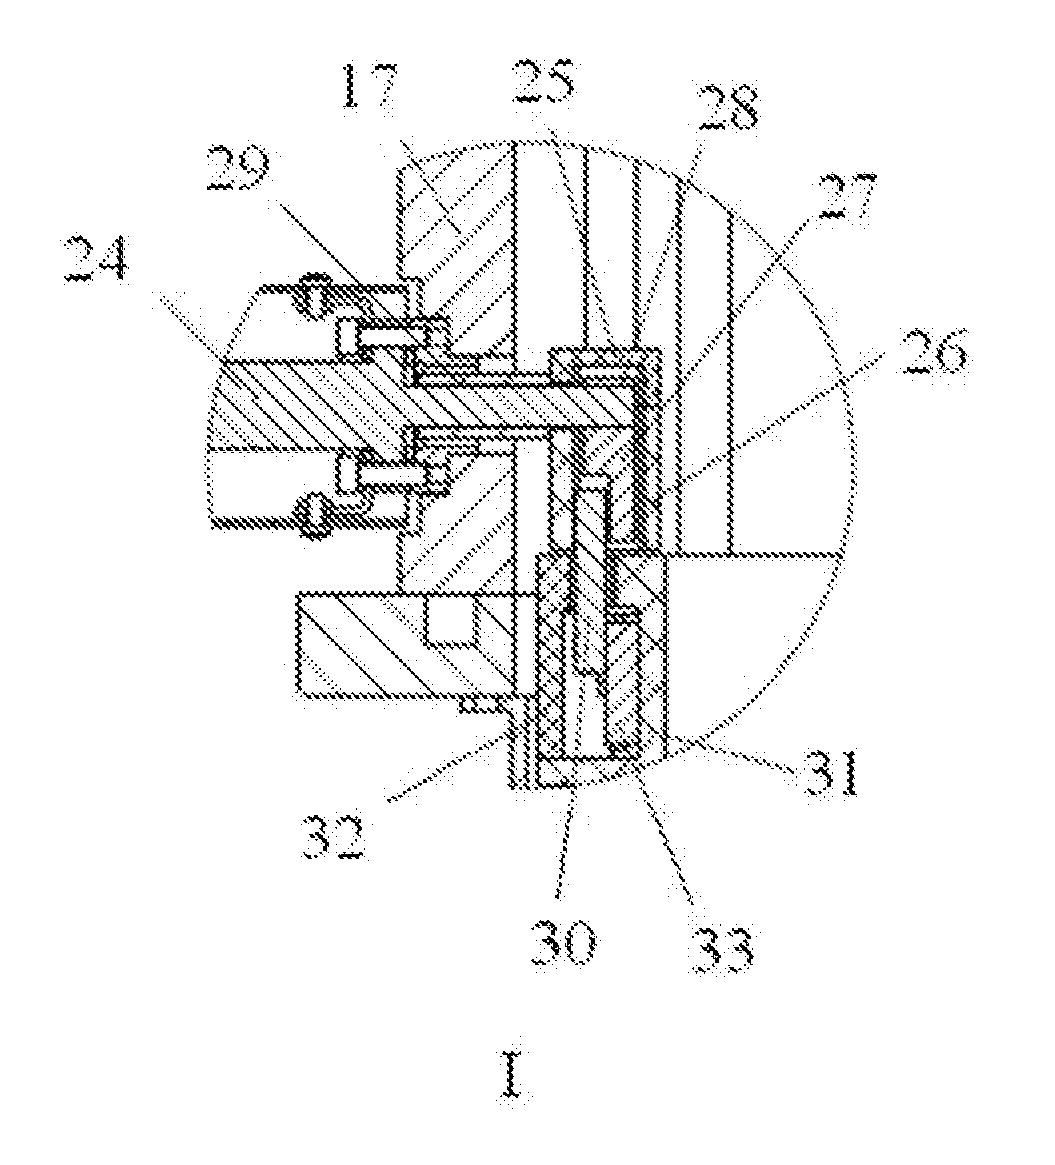 Heating chamber and semiconductor processing apparatus